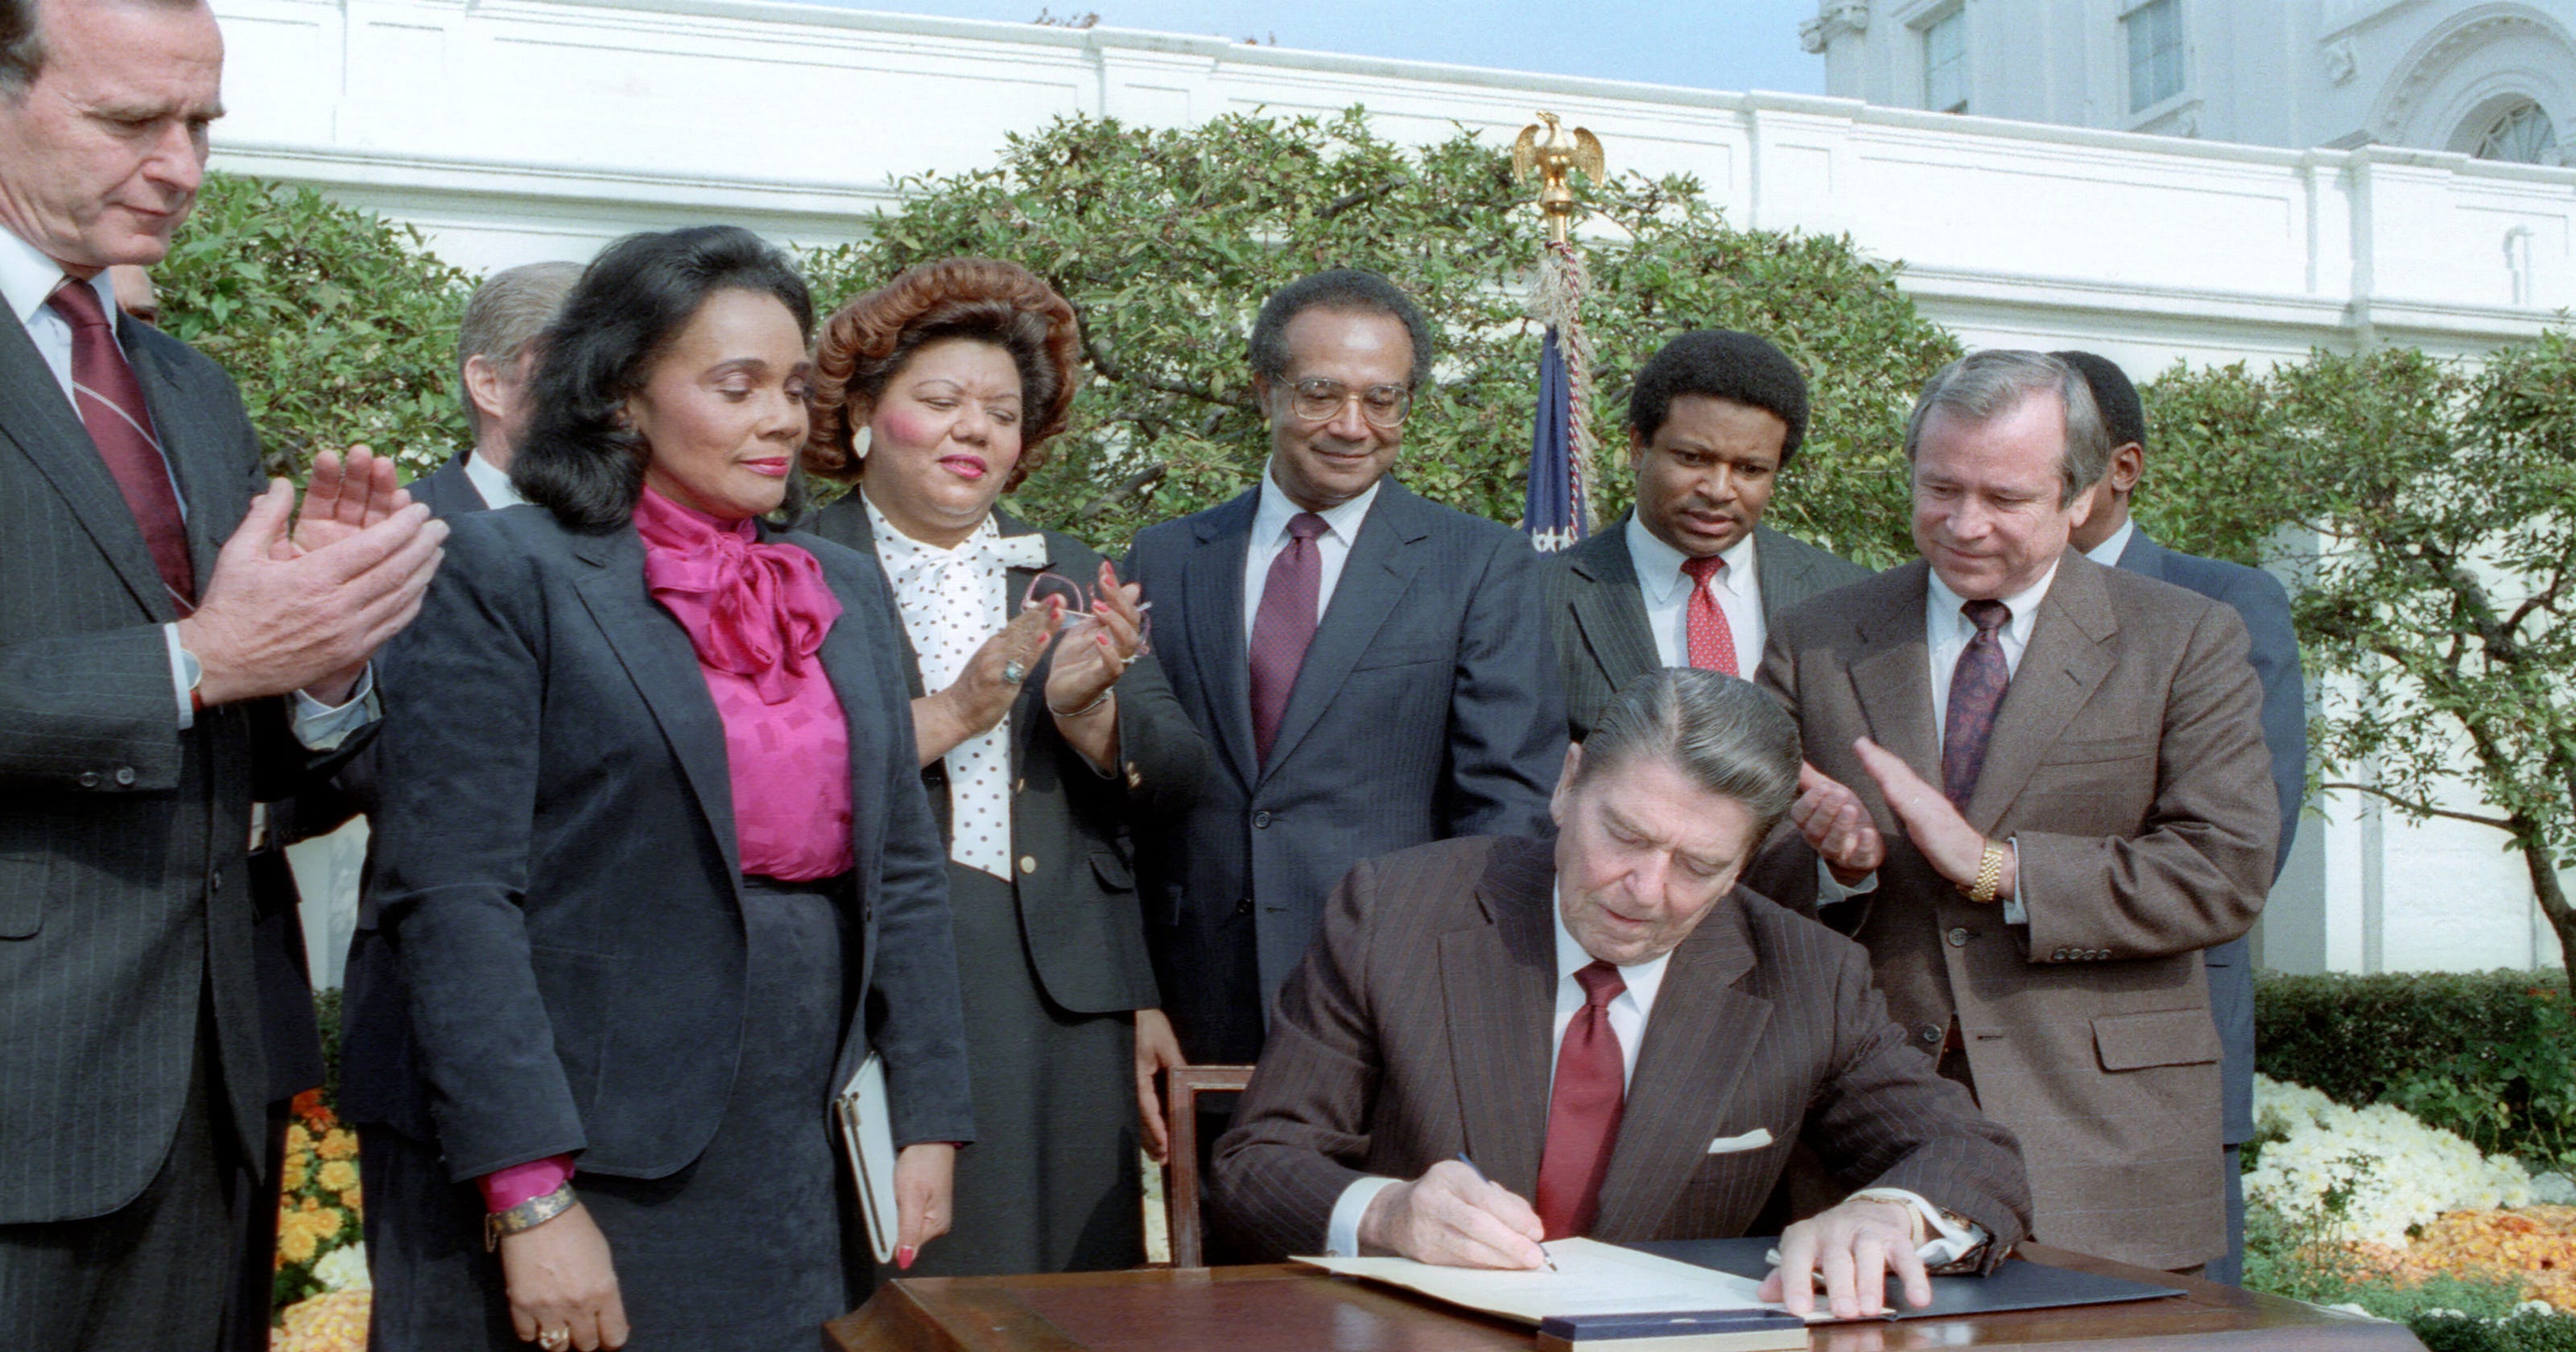 Image result for Ronald Reagan signed a bill establishing a federal holiday on the third Monday of January in honor of civil rights leader Dr. Martin Luther King Jr.